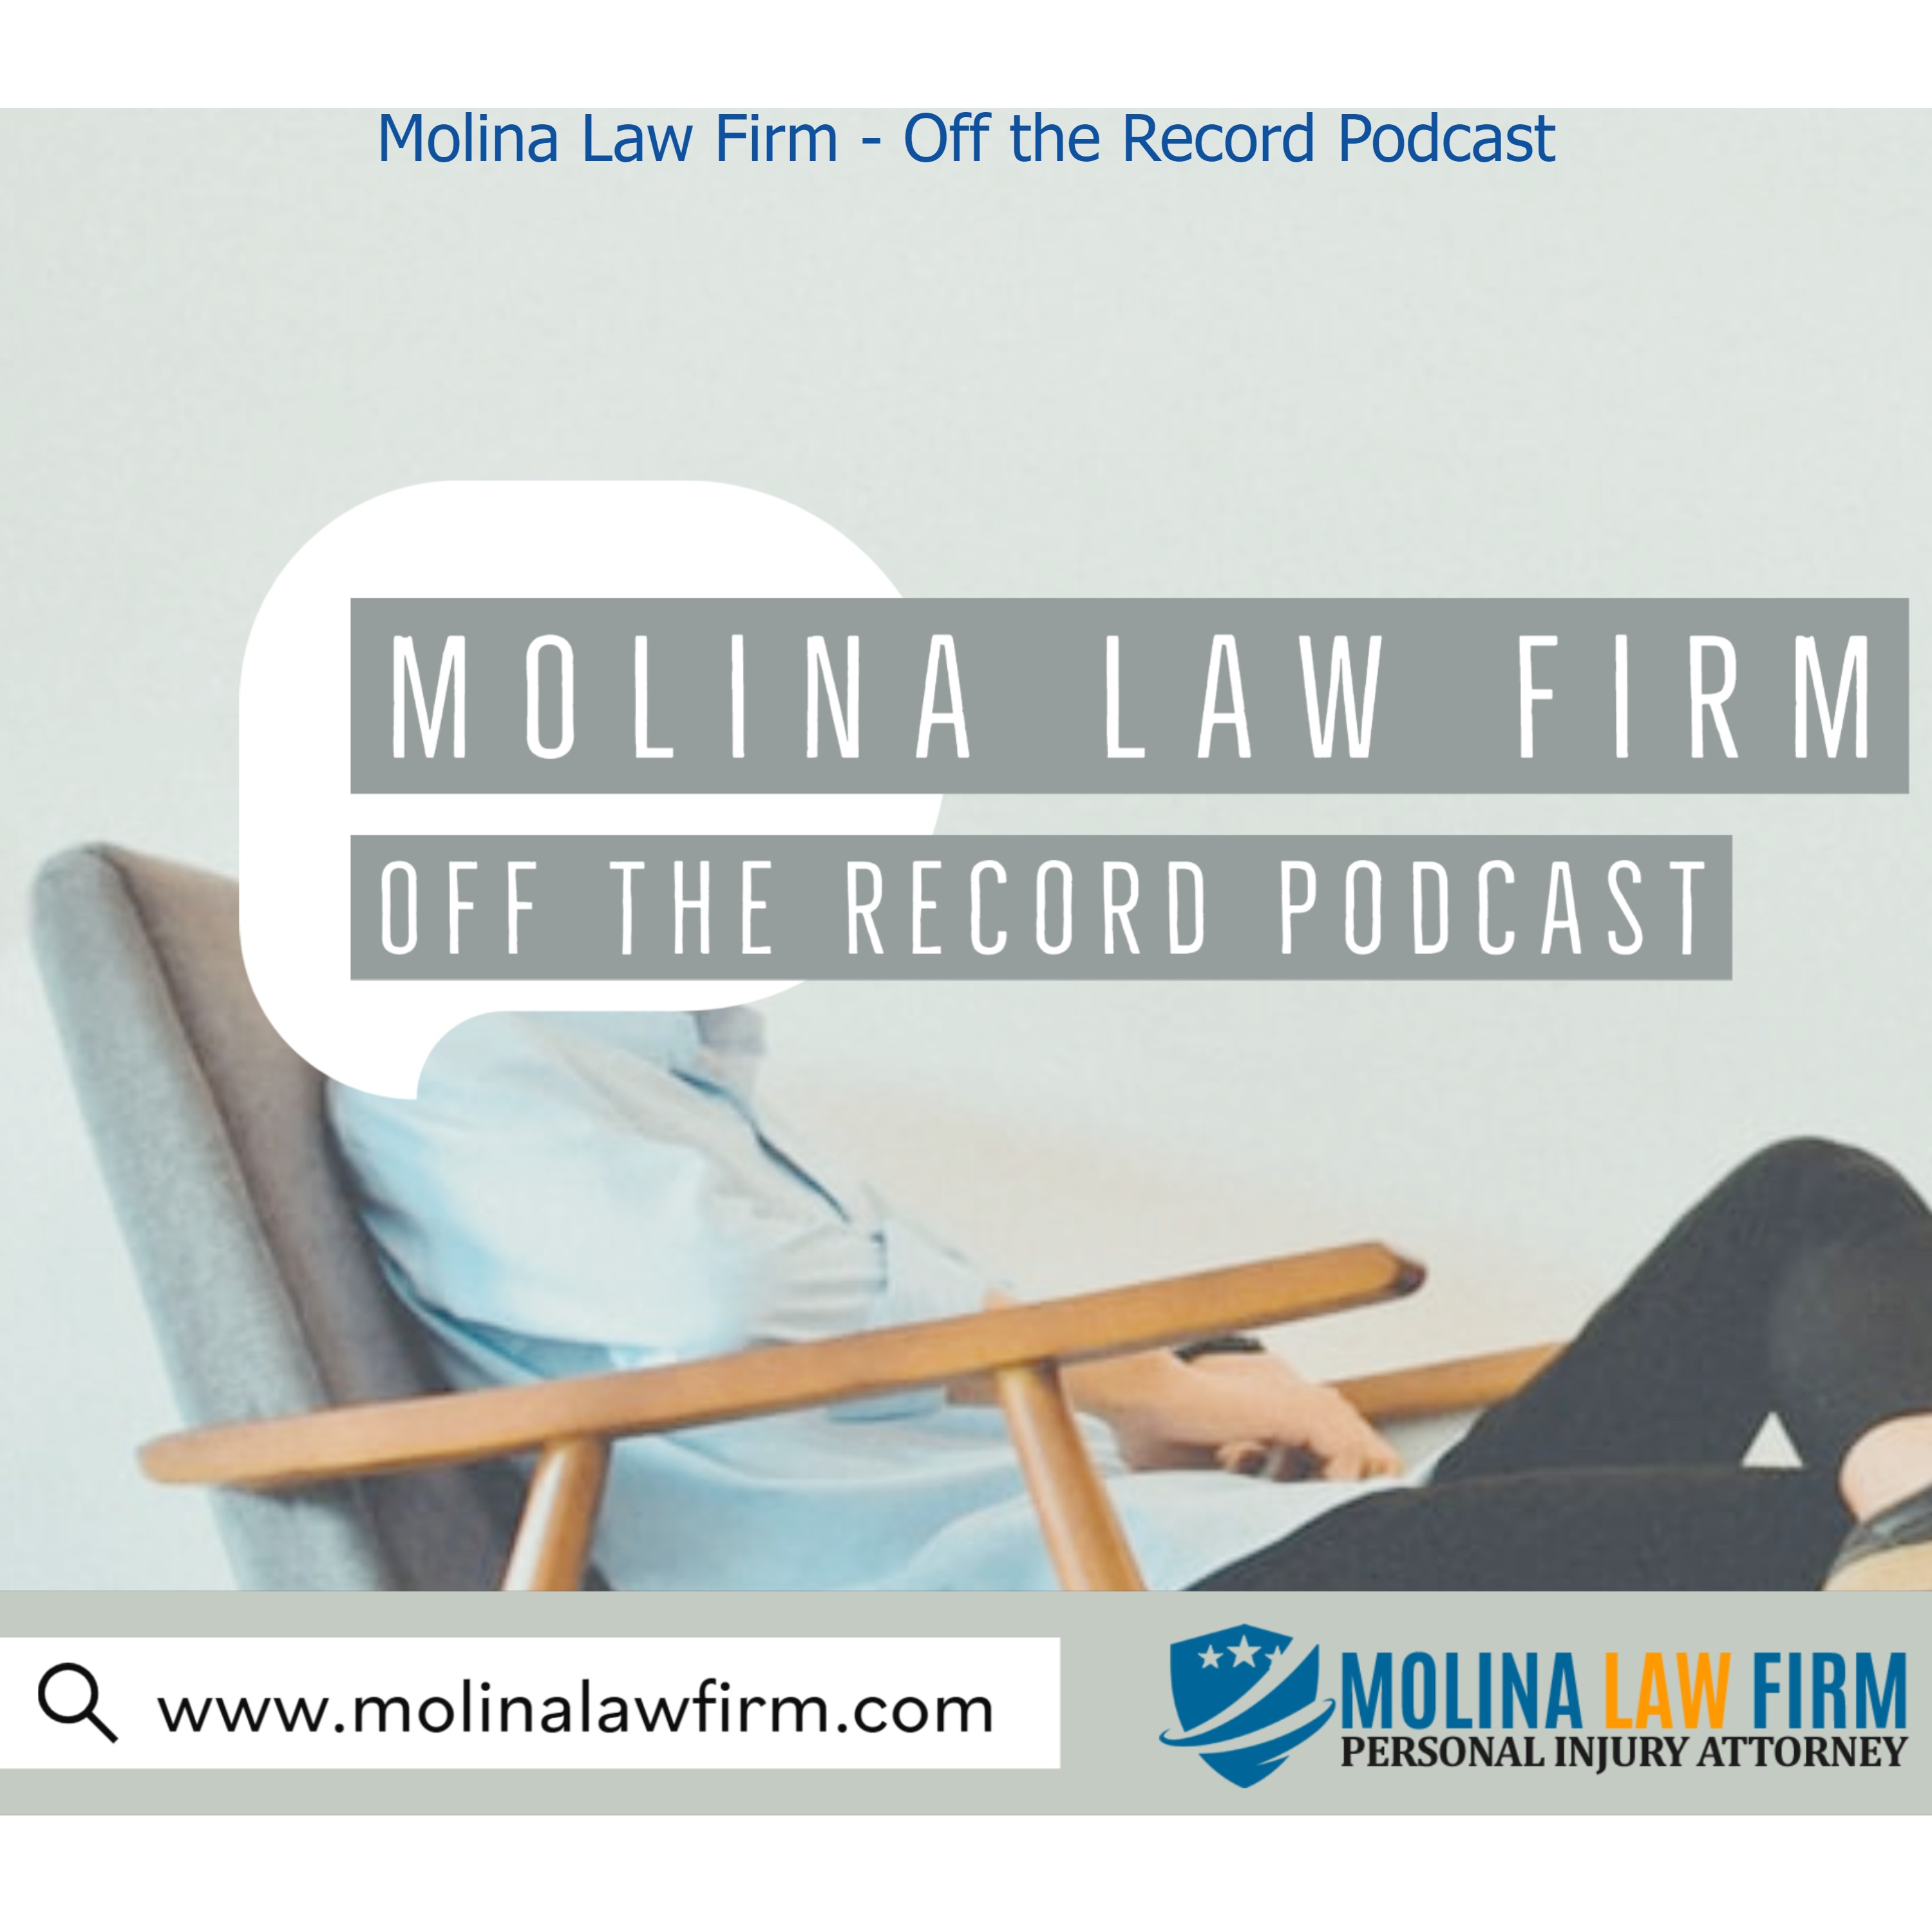 Molina Law Firm - Off the Record Podcast